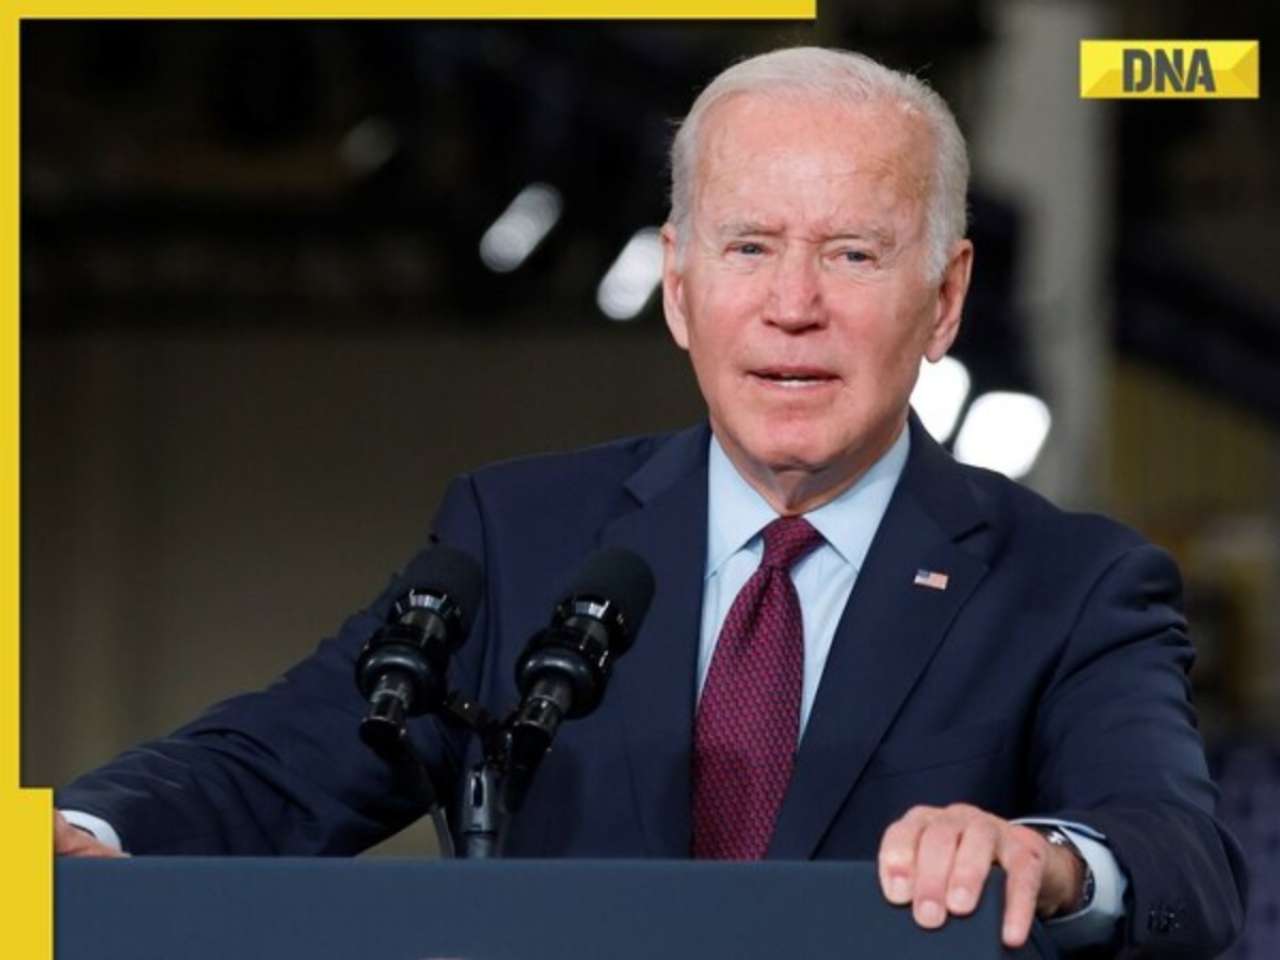 US President Joe Biden plans to restrict US investment in Chinese technology critical for modernising military